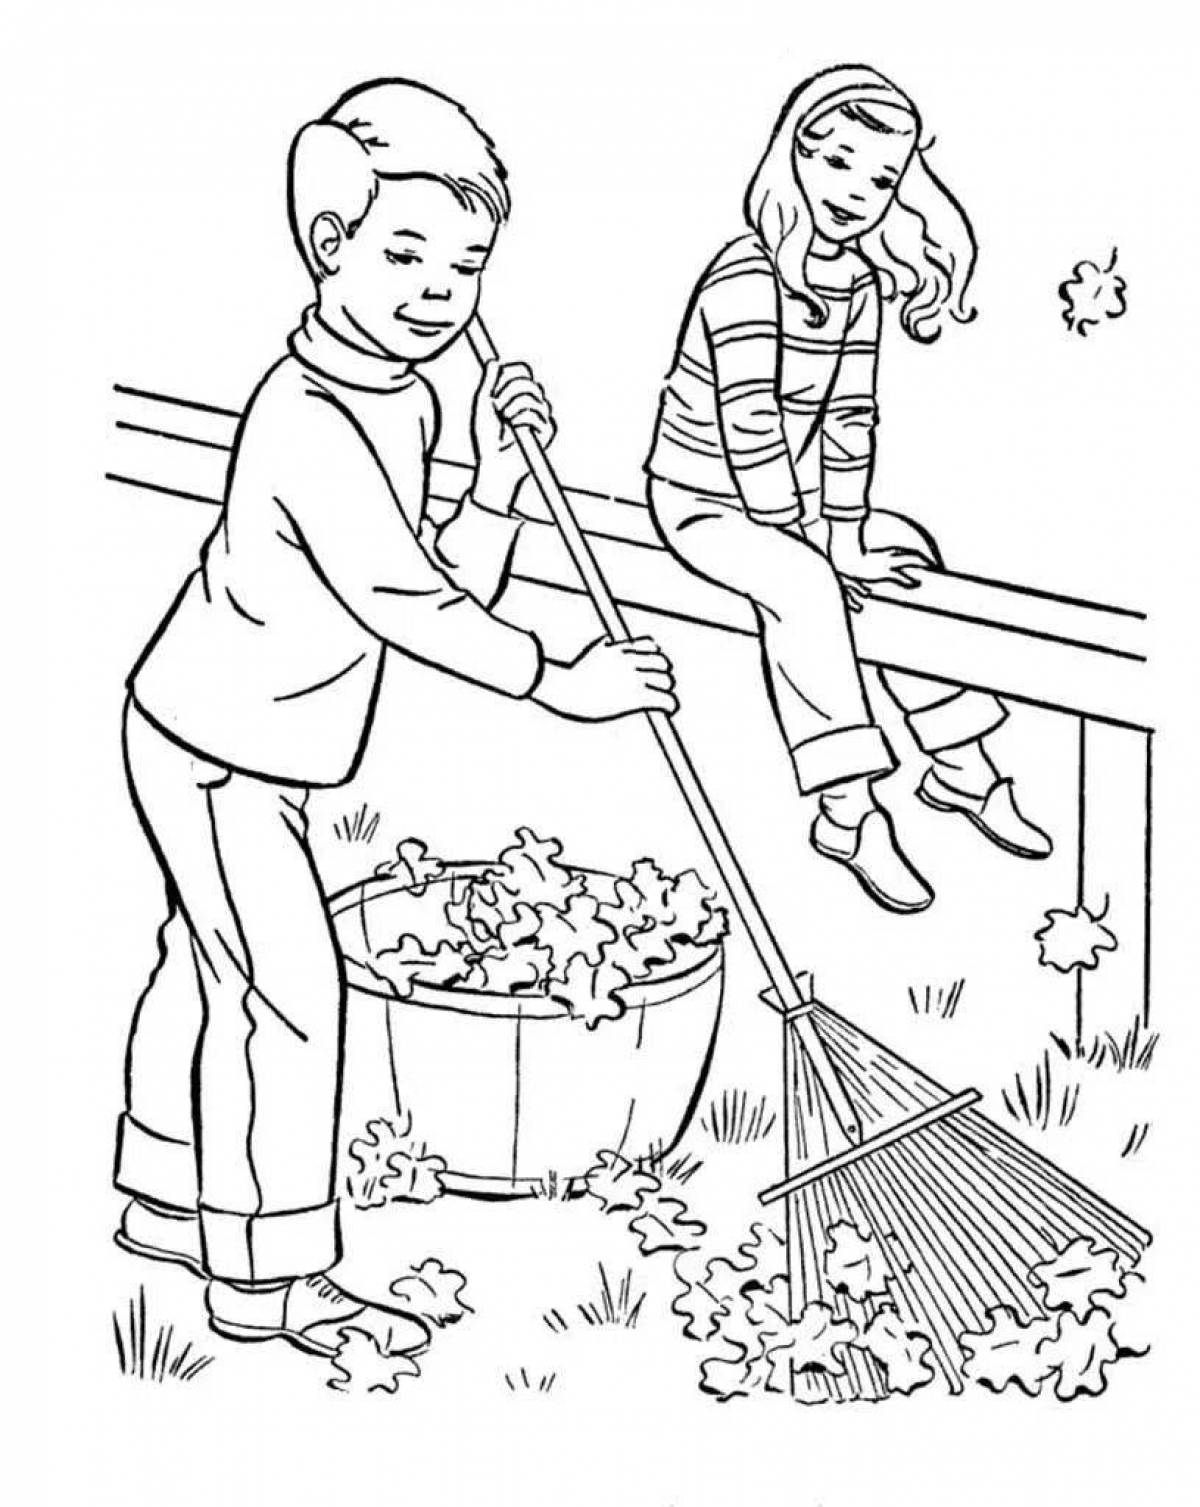 Glorious man and nature coloring page